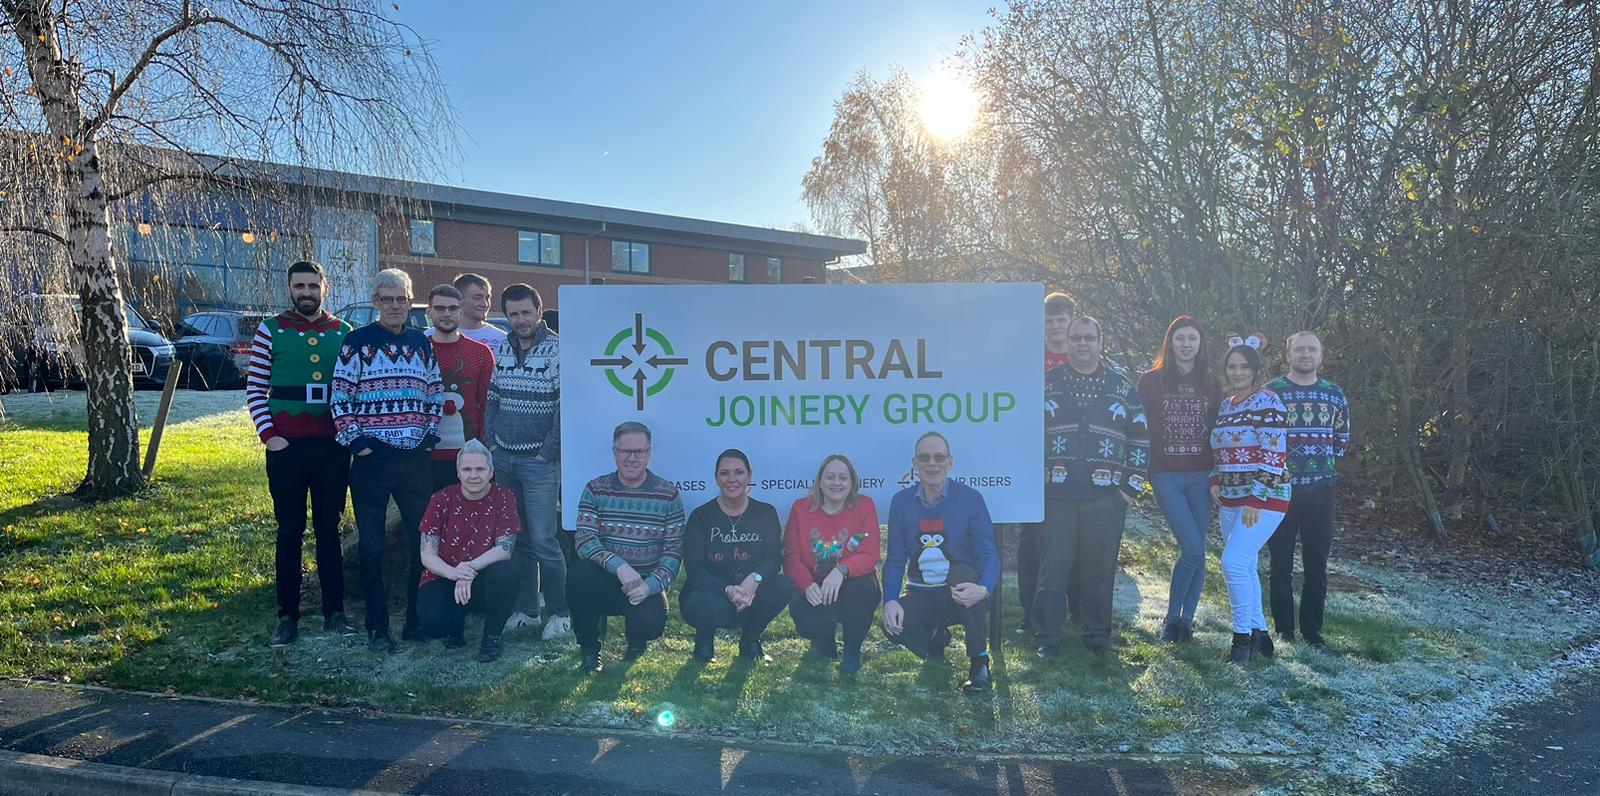 Central Joinery Group